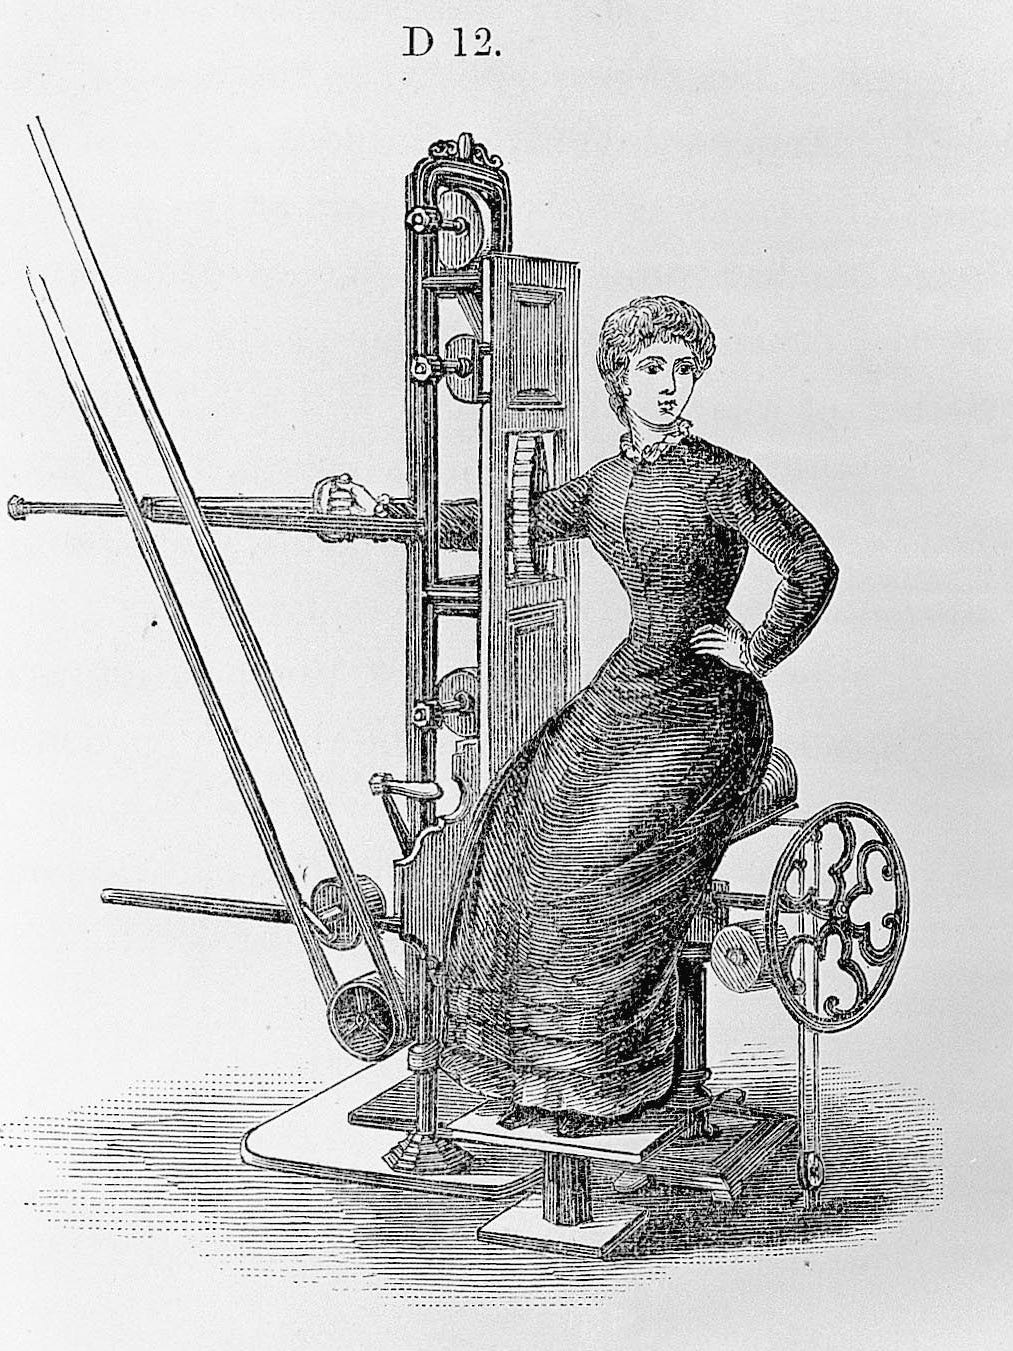 Victorians were fascinated with mechanical exercise.  This contraption in 1883 was called a "Shampooing Machine for the Arms" by the Zander Institute in Stockholm.  Dr. Jonas Zander's exercise machines won a gold medal at the 1876 Centennial Exhibition in Philadelphia.